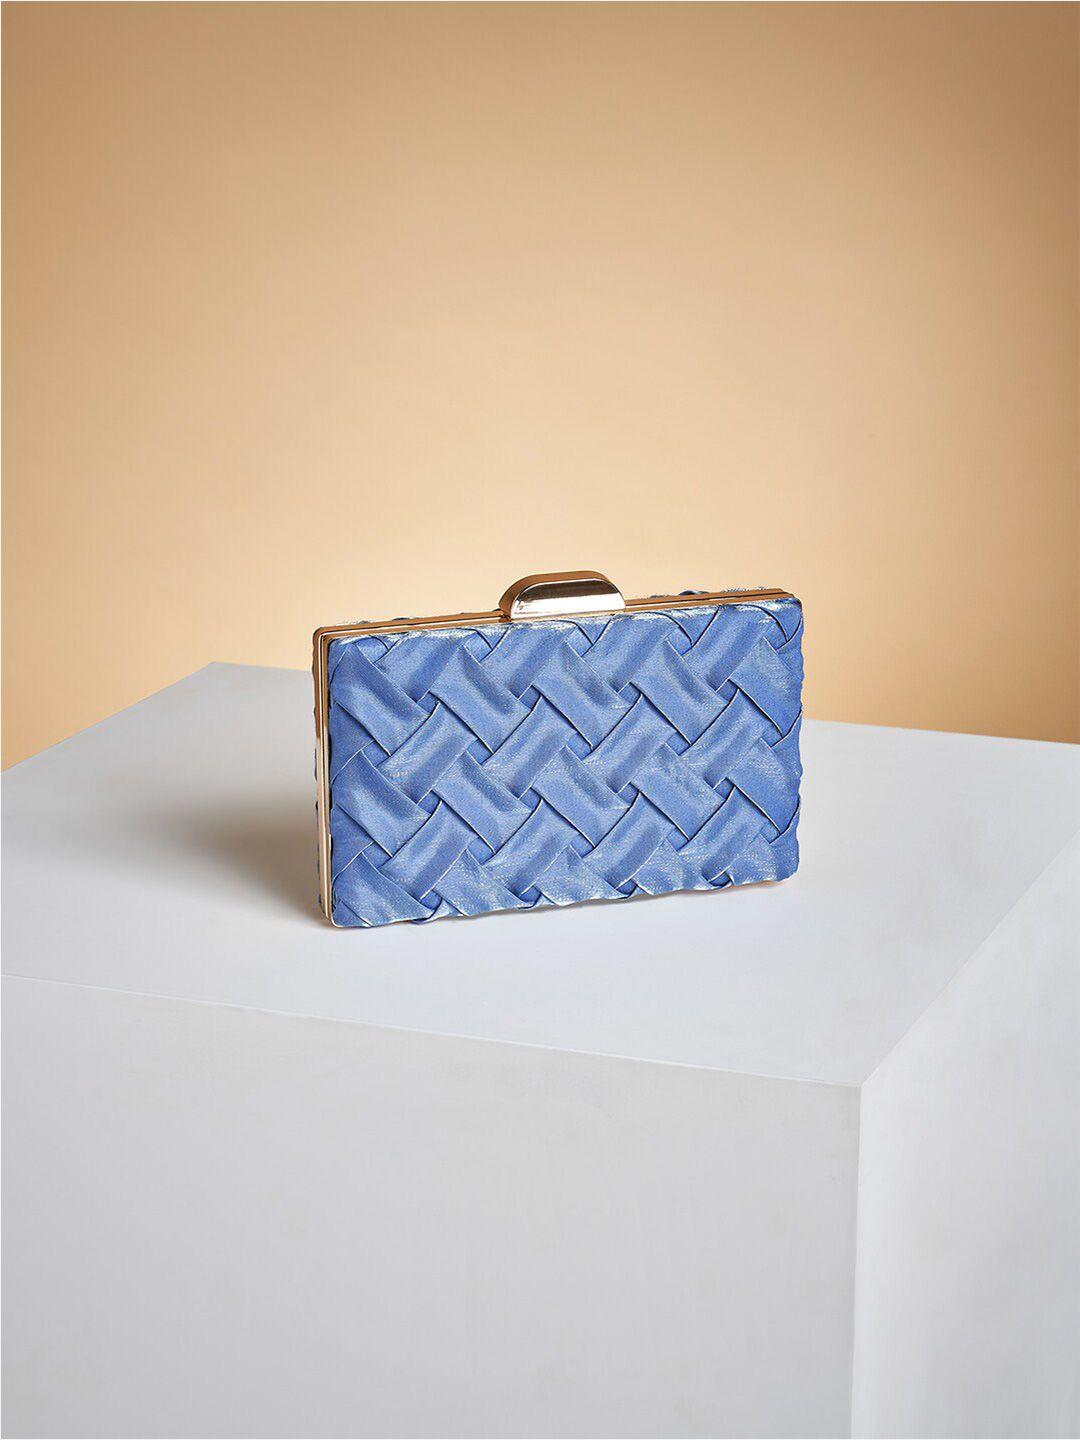 forever glam by pantaloons textured box clutch